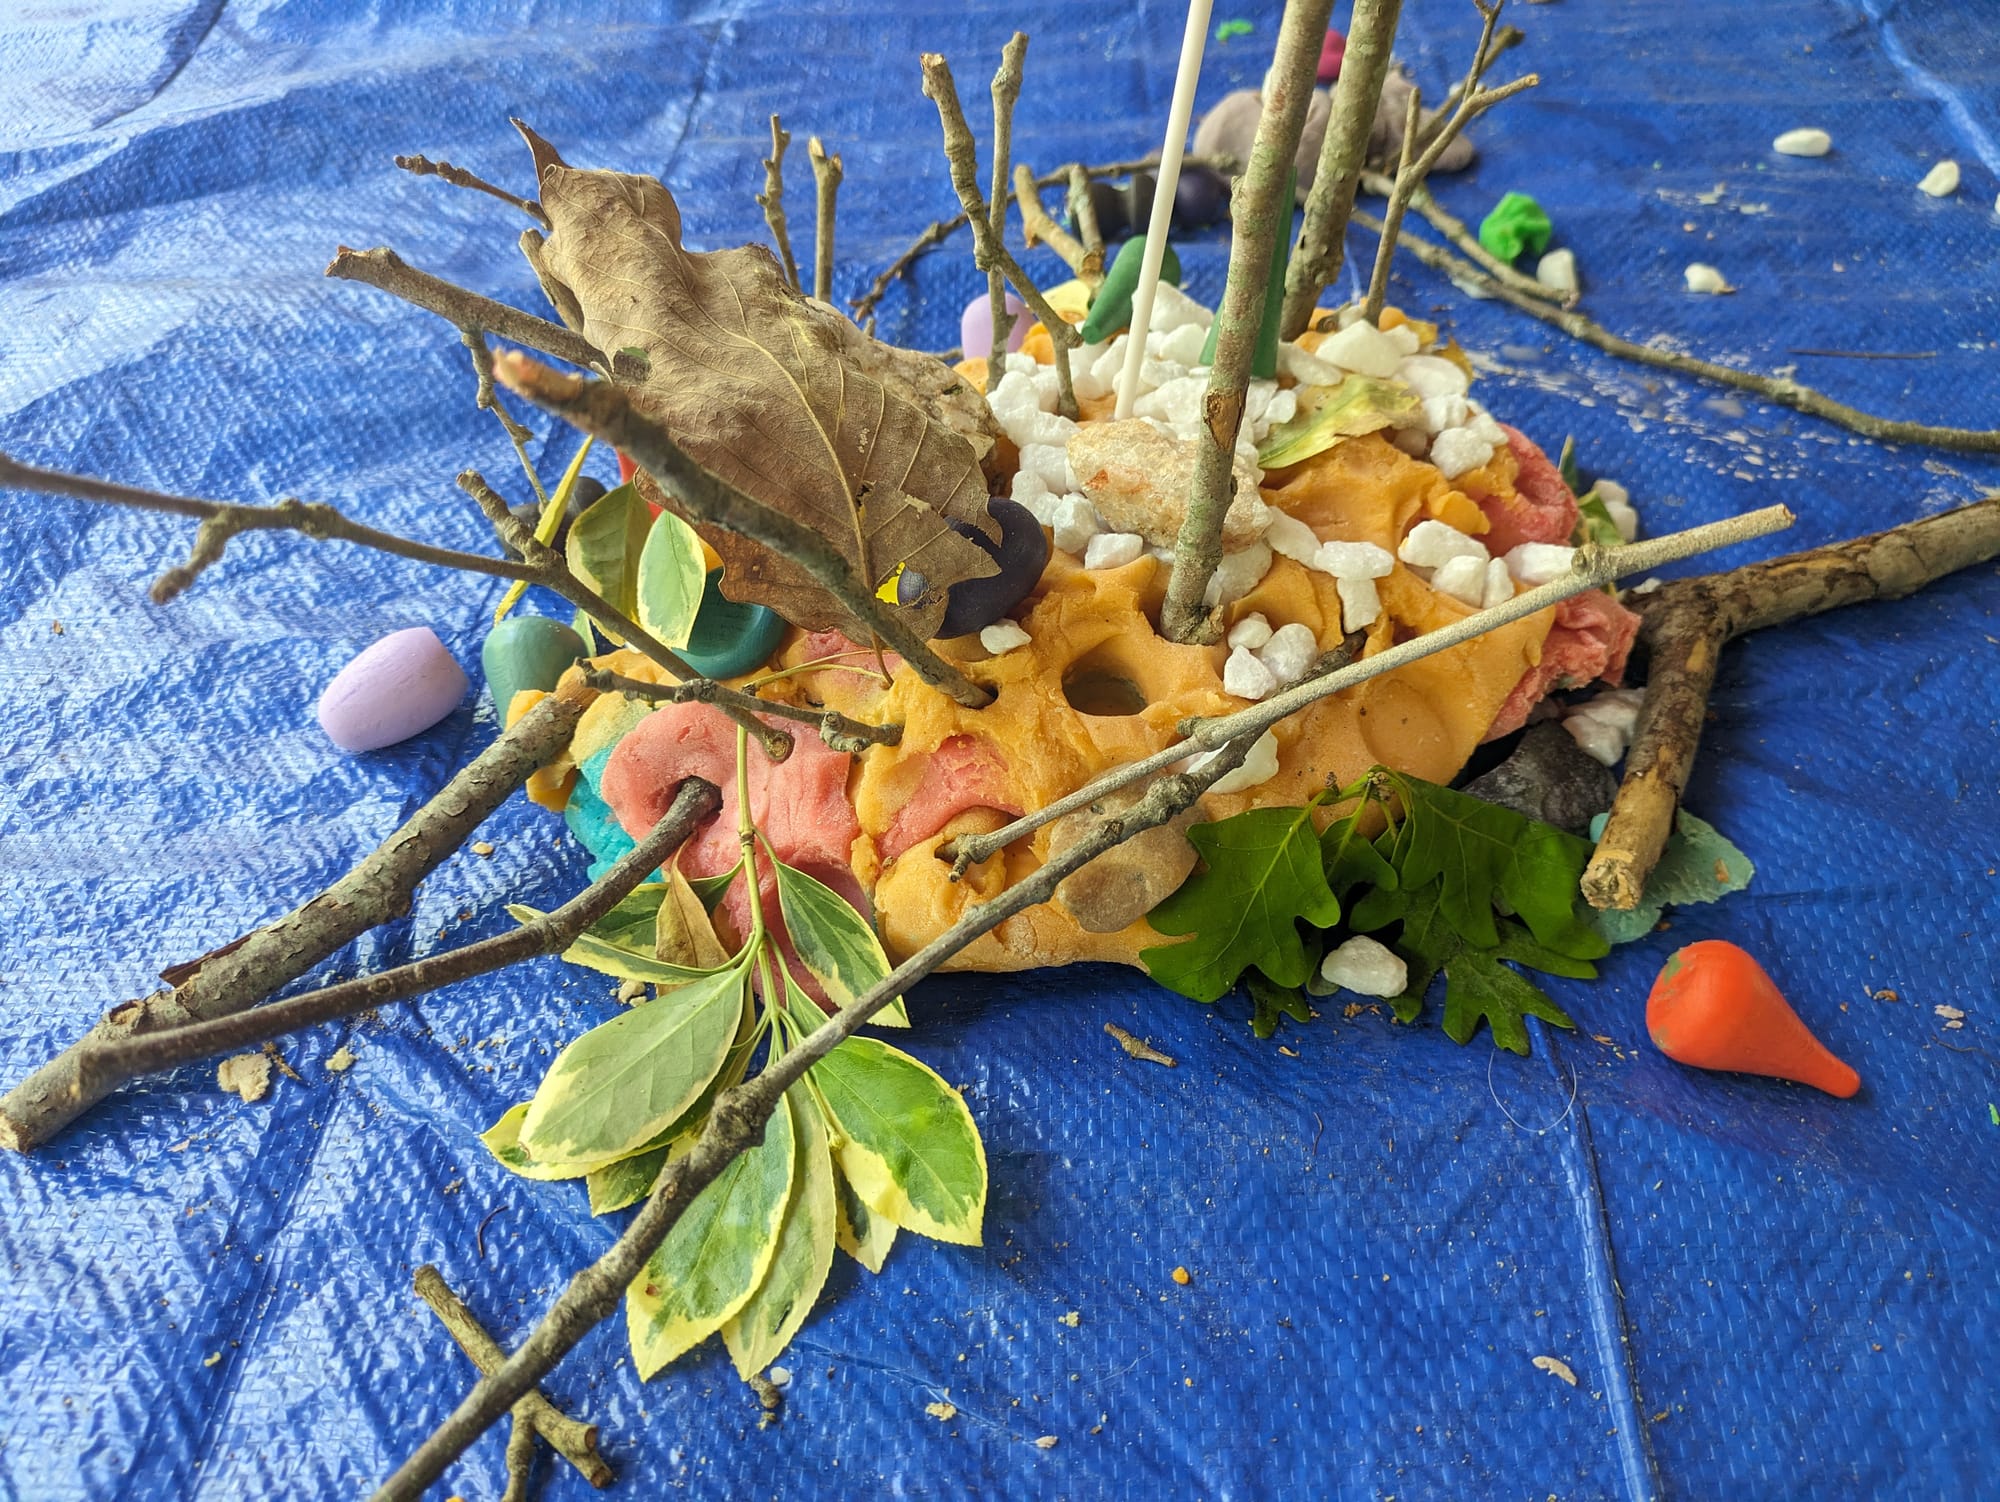 (Image: Close up photo of a large flat chunk of orange playdough with several sticks, rocks, leaves, and other little nature pieces sticking out of it in every direction)